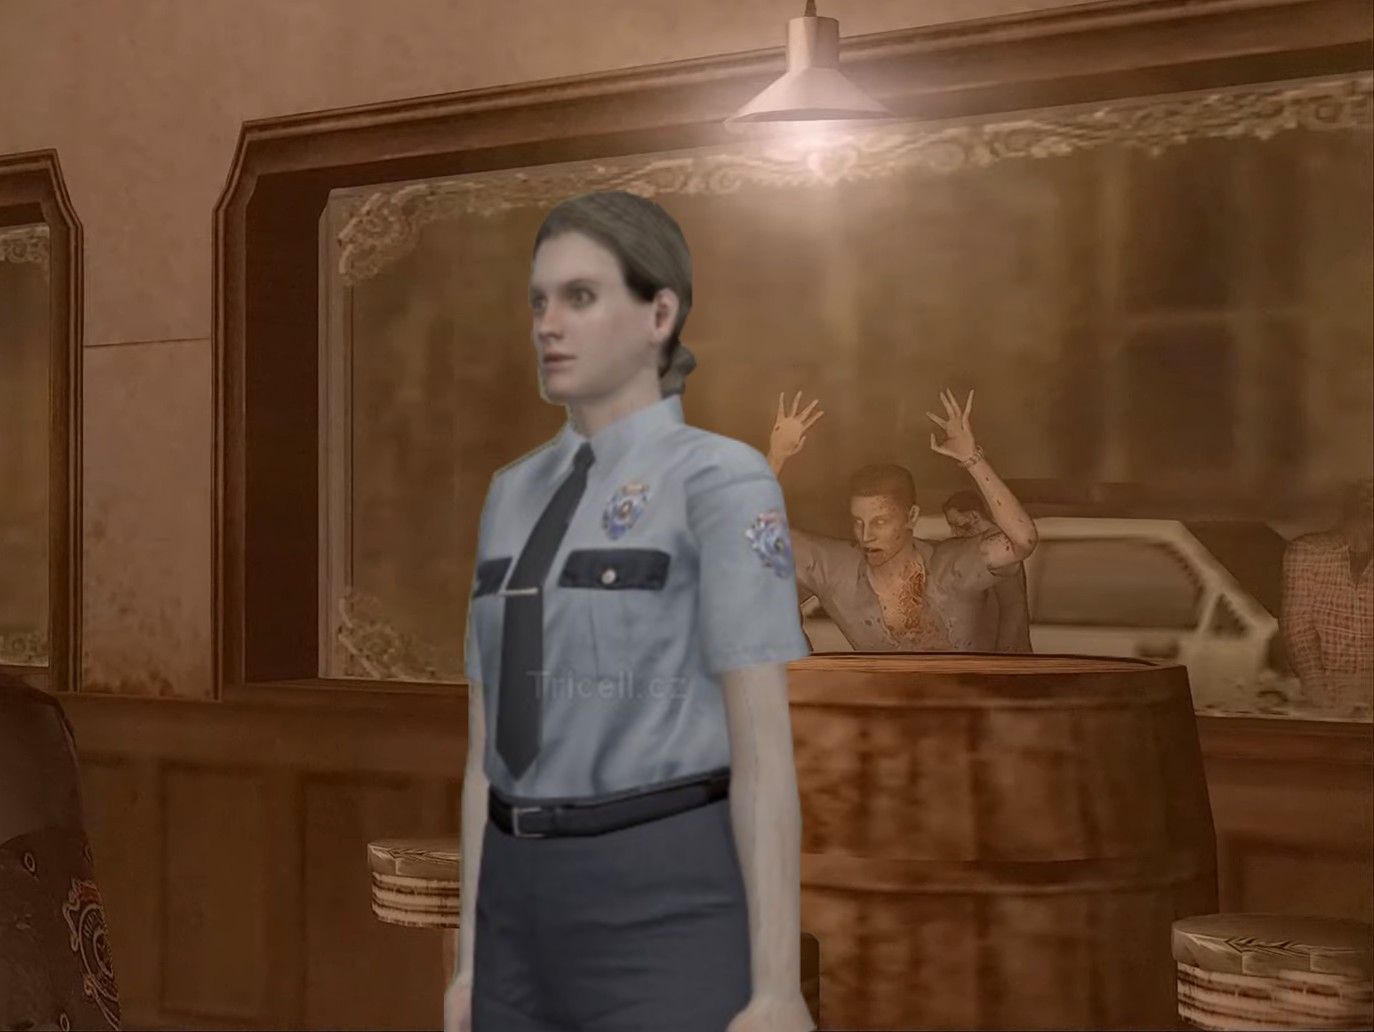 Darcy Powell Resident Evil